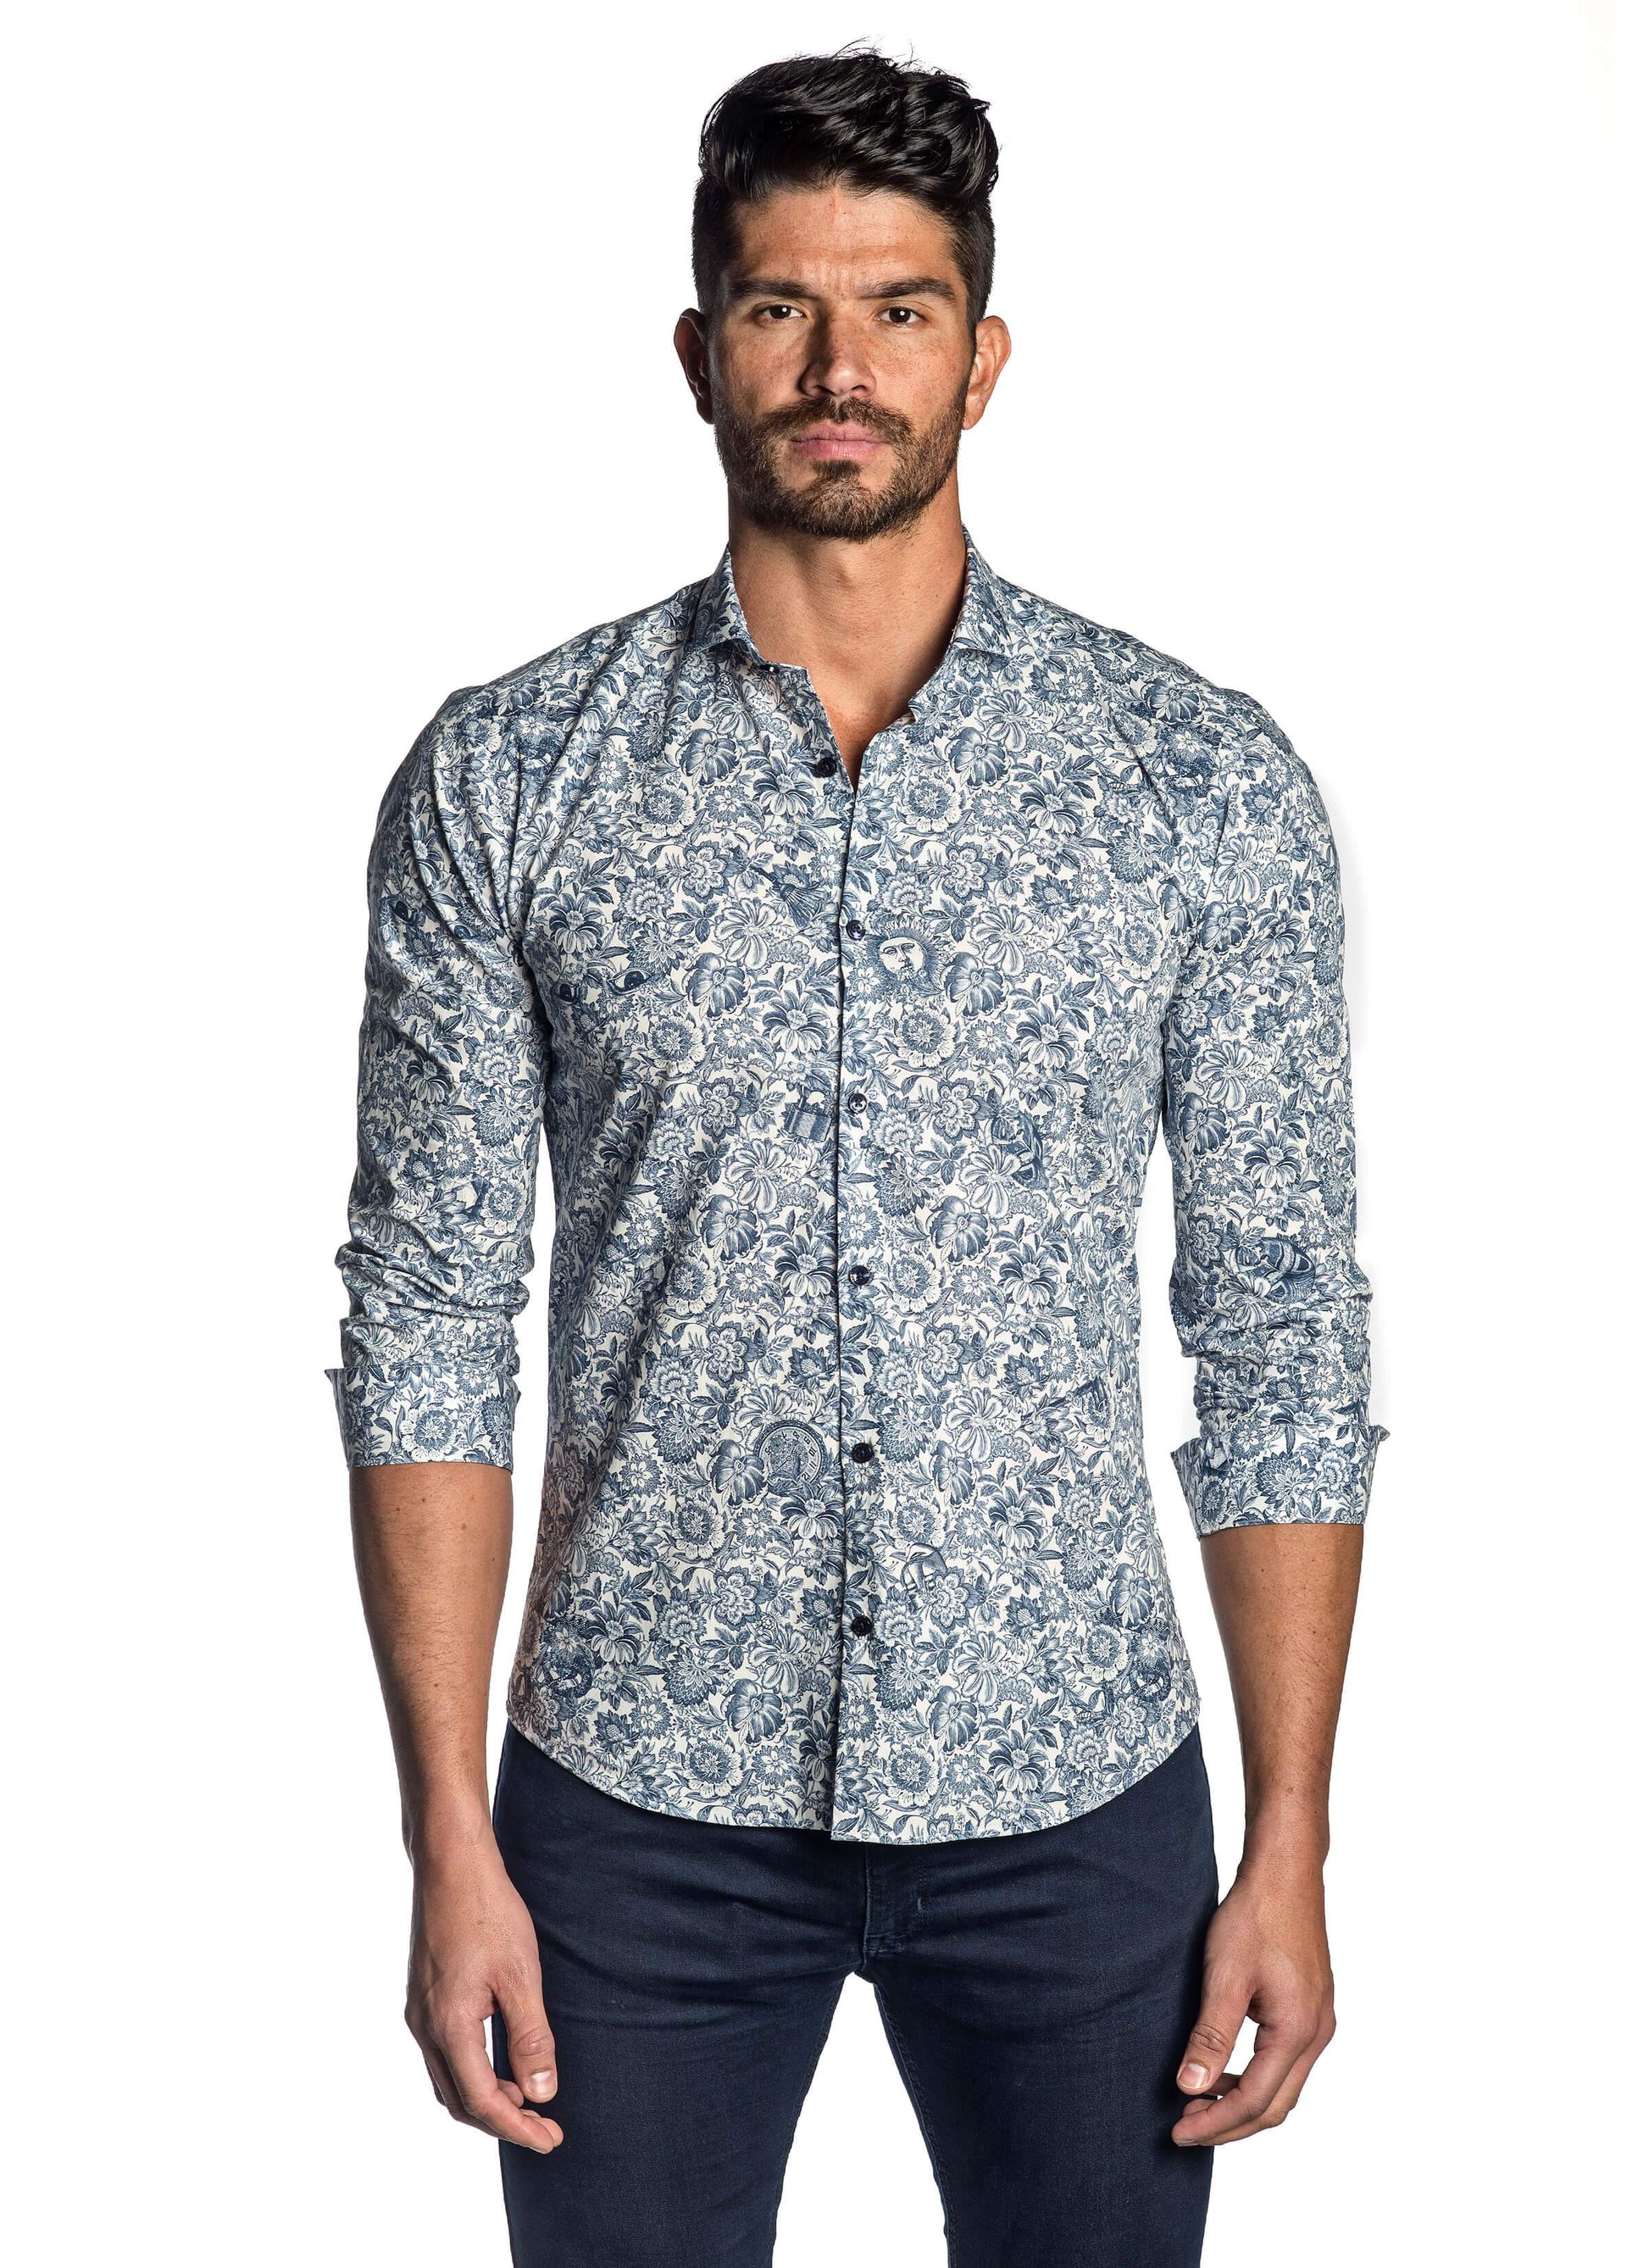 White and Blue Floral Shirt for Men ITA-T-8091 - Front - Jared Lang